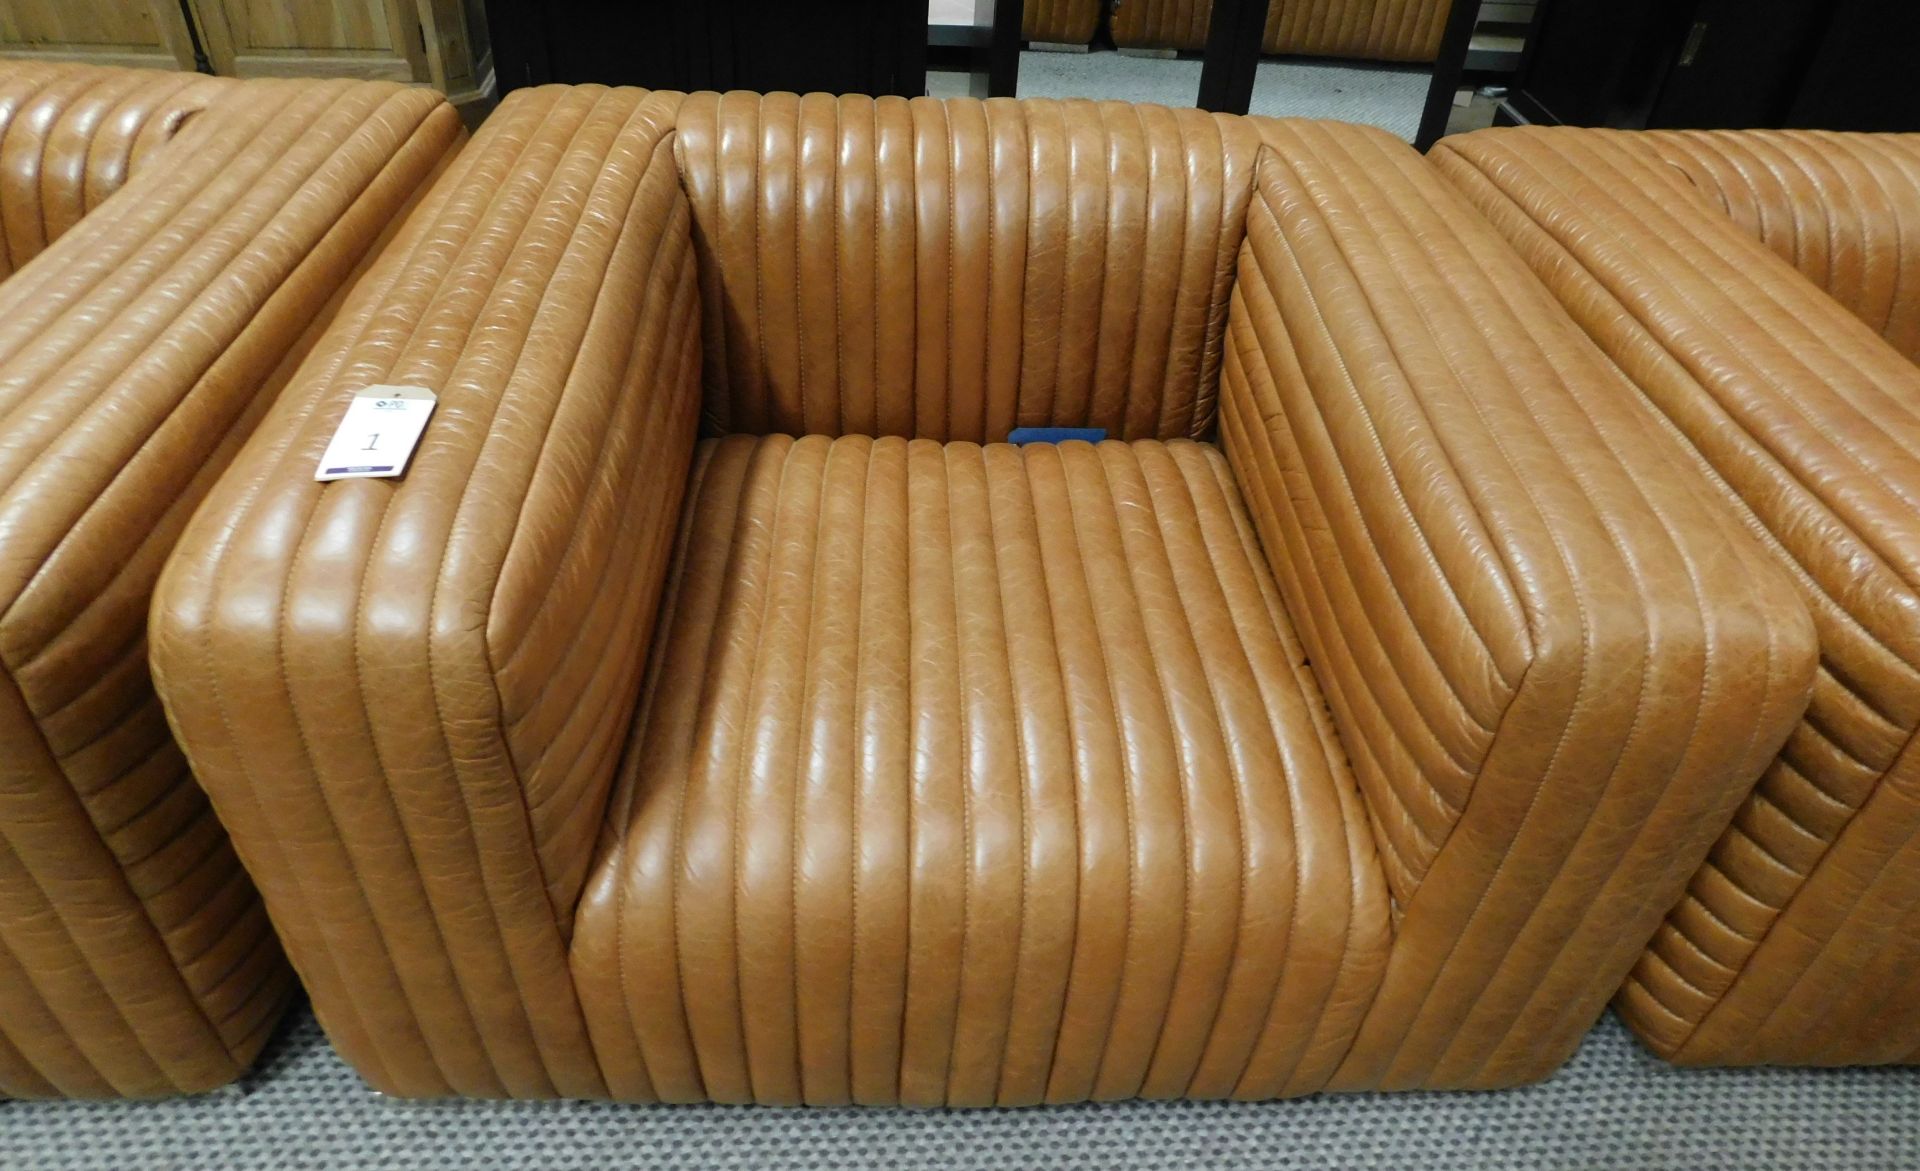 Coach House “Awesome” Ribbed Tan Leather Settee With Two Matching Armchairs - Image 2 of 5